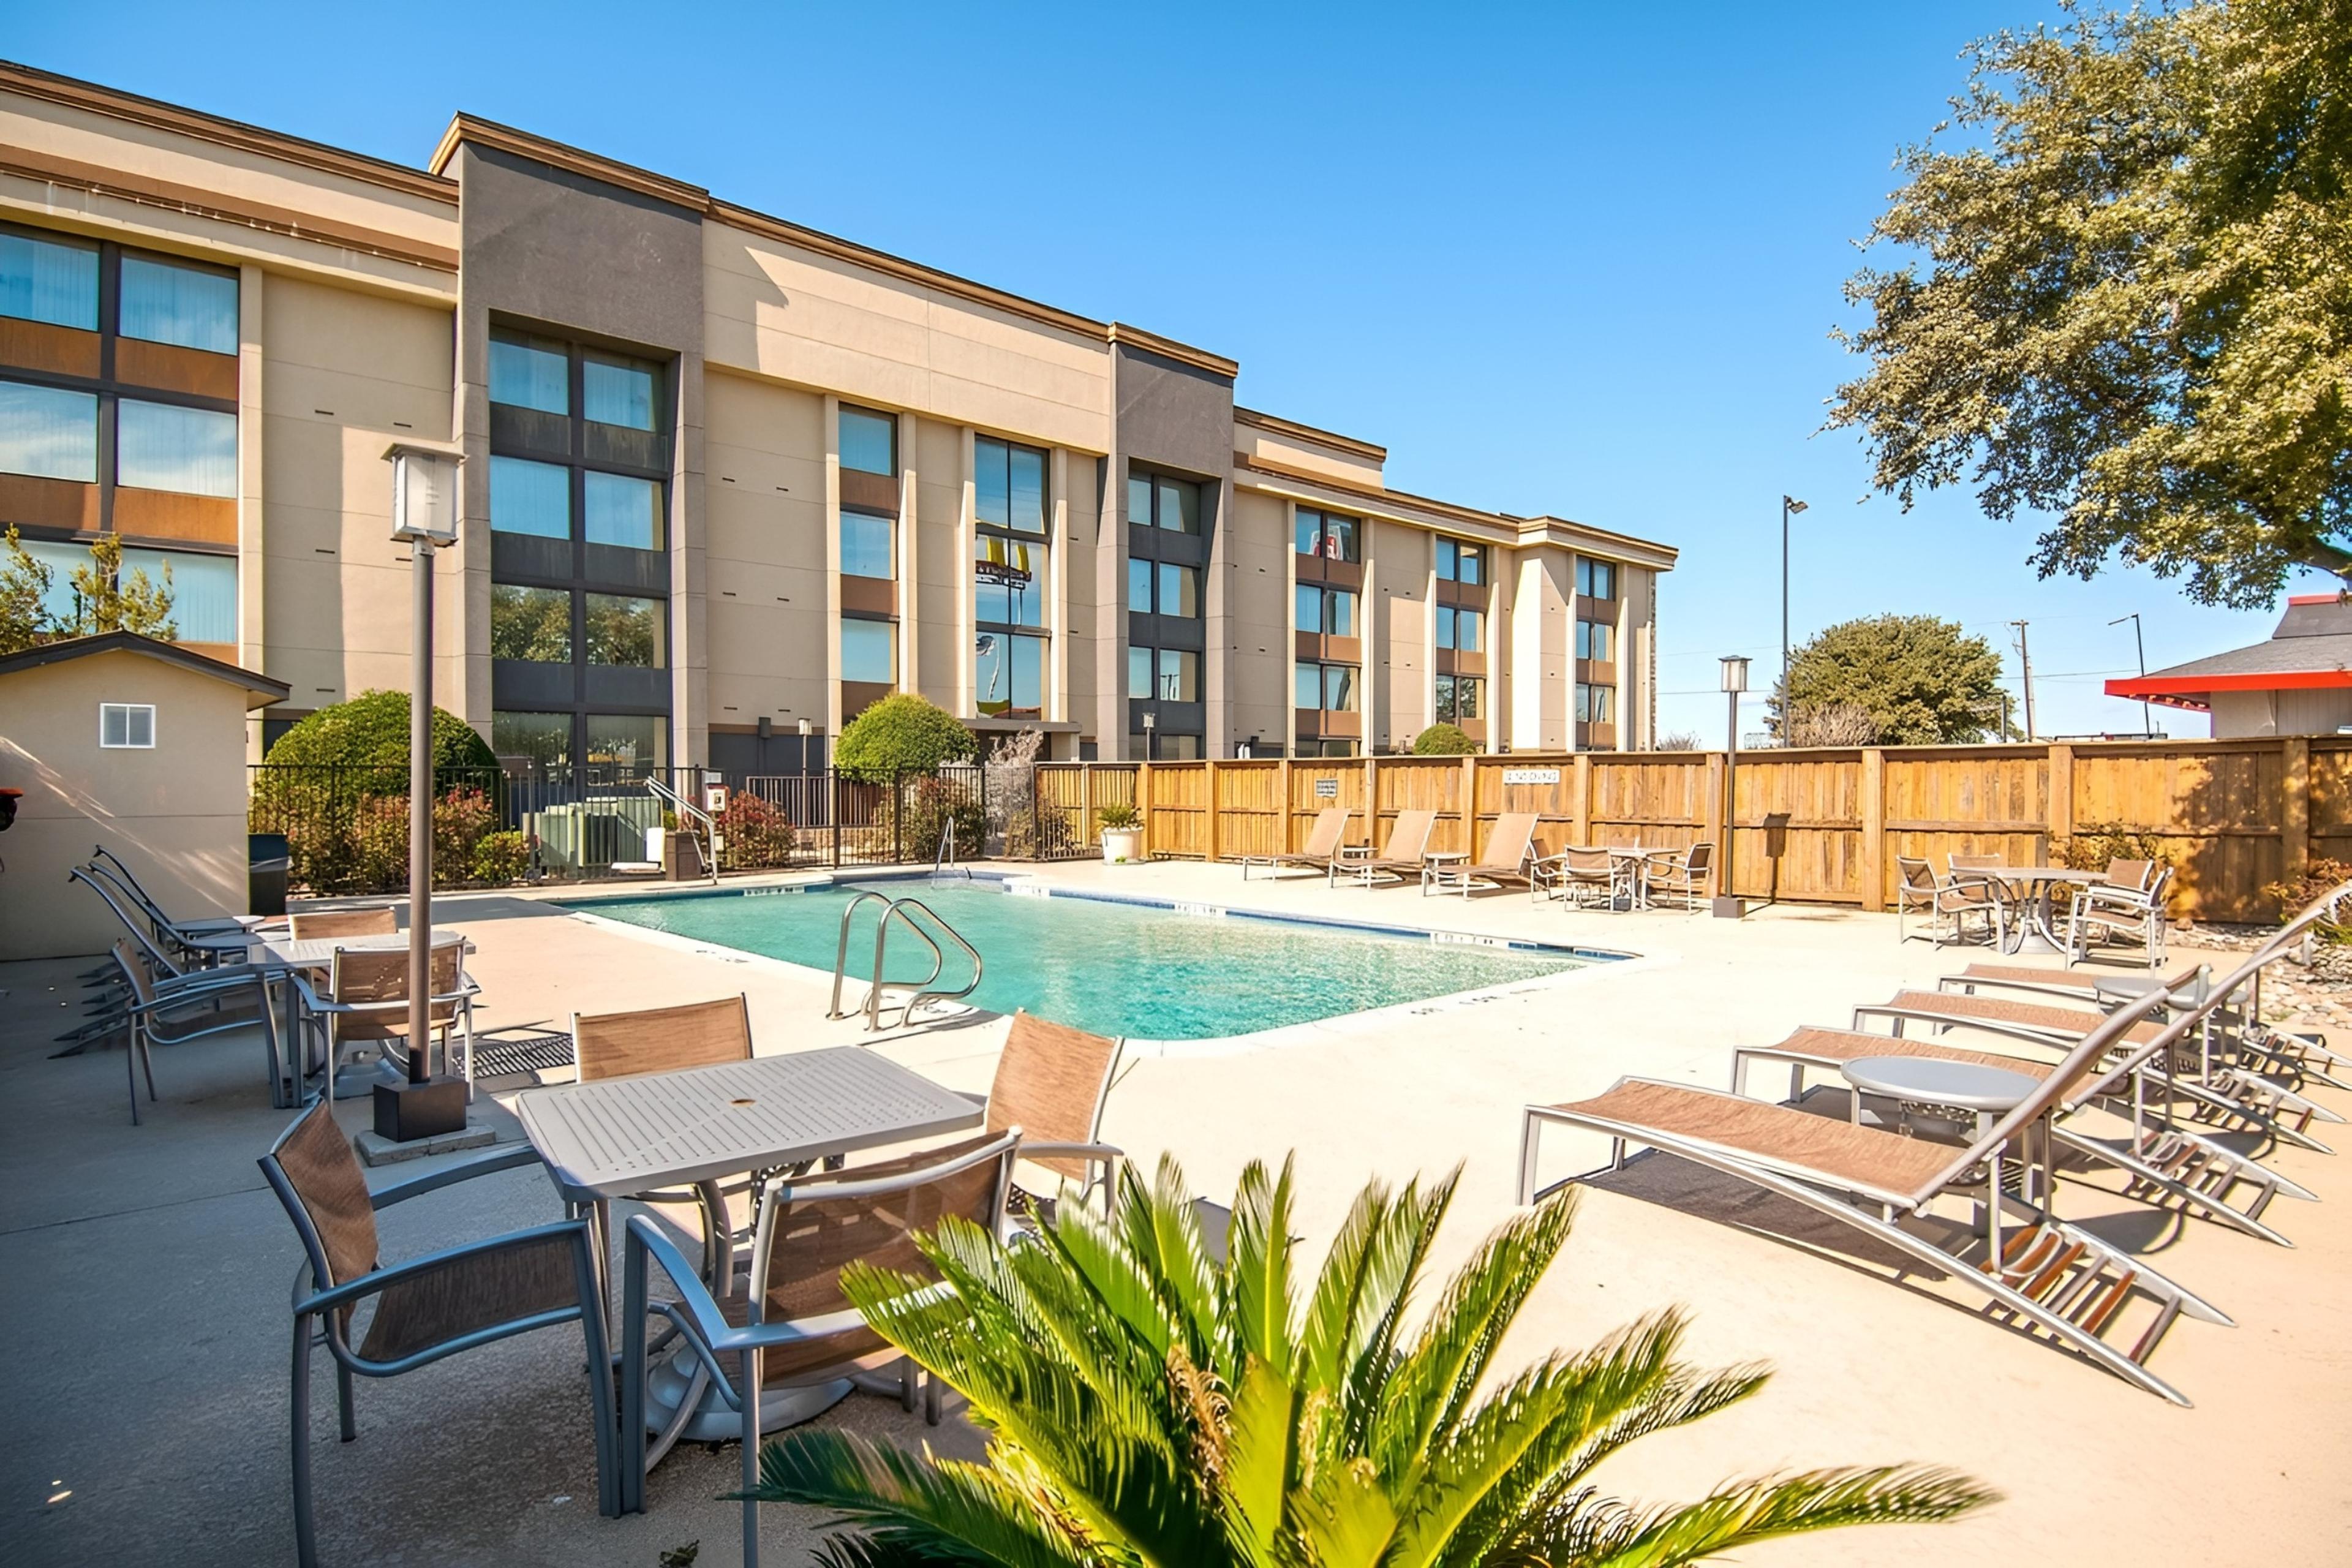 Fairfield Inn & Suites by Marriott Dallas DFW Airport South/Irving